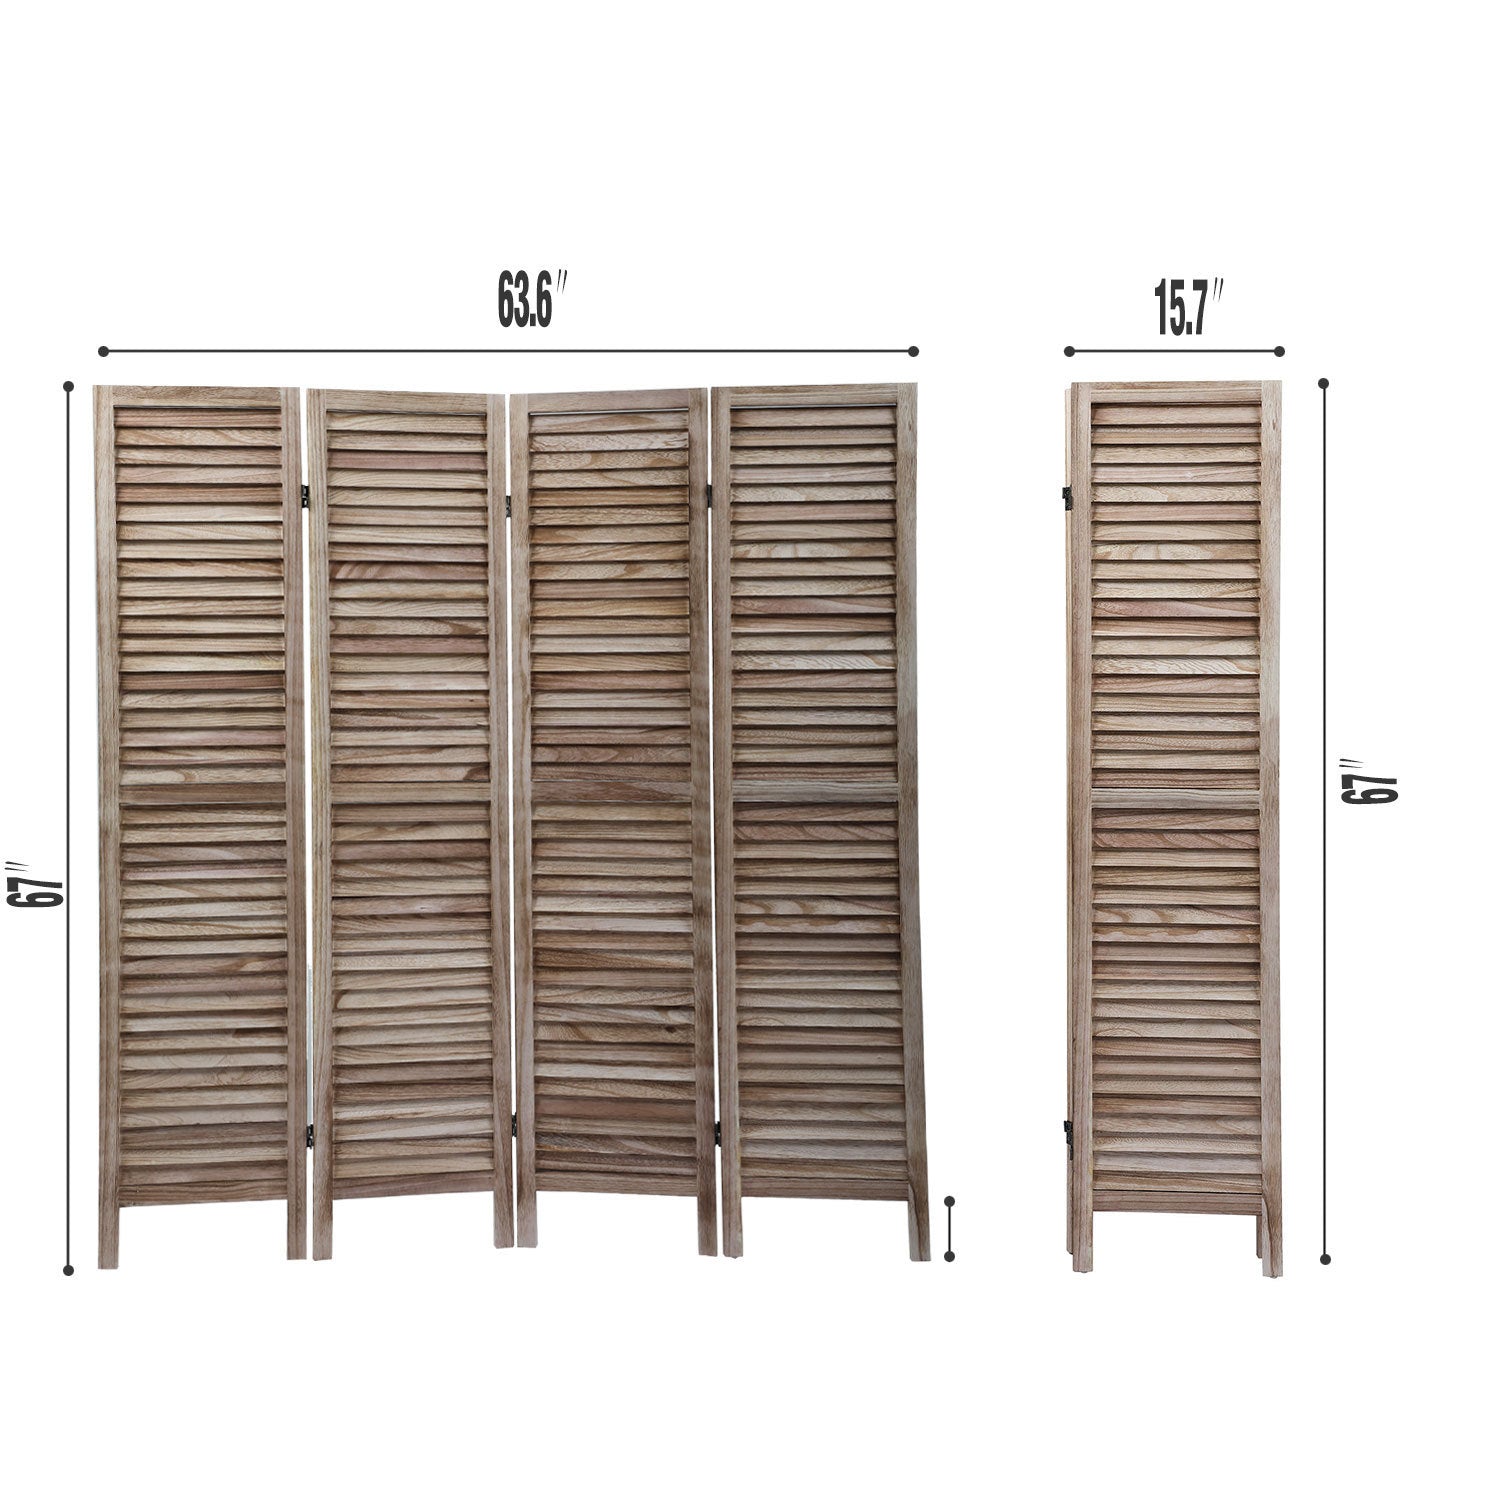 Sycamore Wood 4 Panel Room Divider